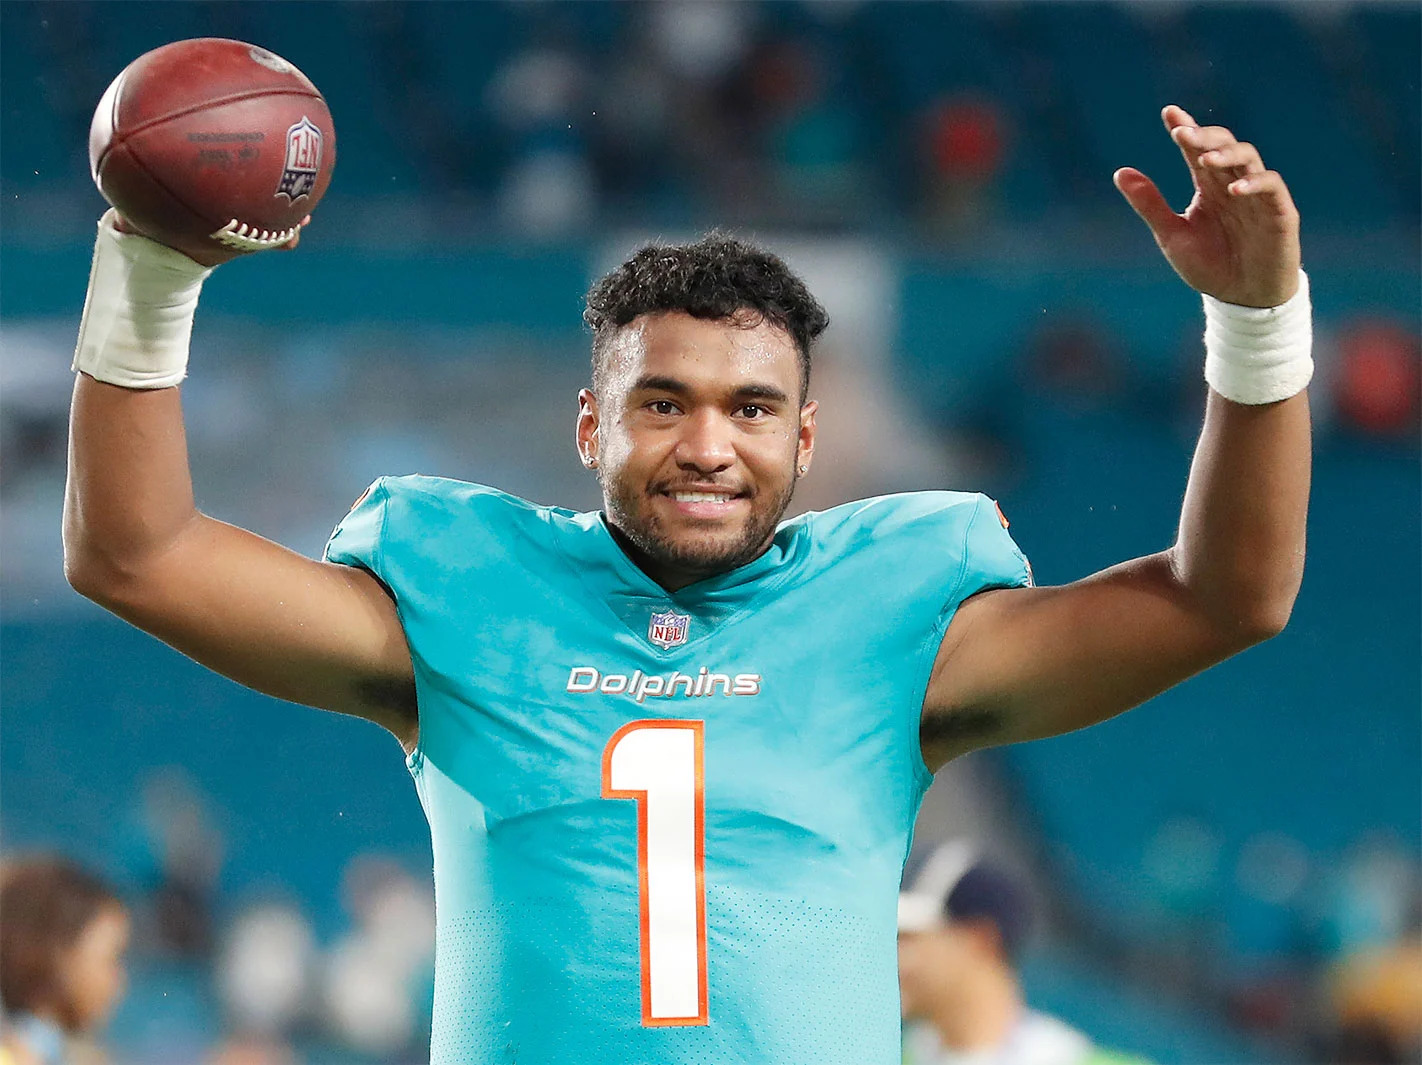 Miami Dolphins QB Tua Tagovailoa out indefinitely after second